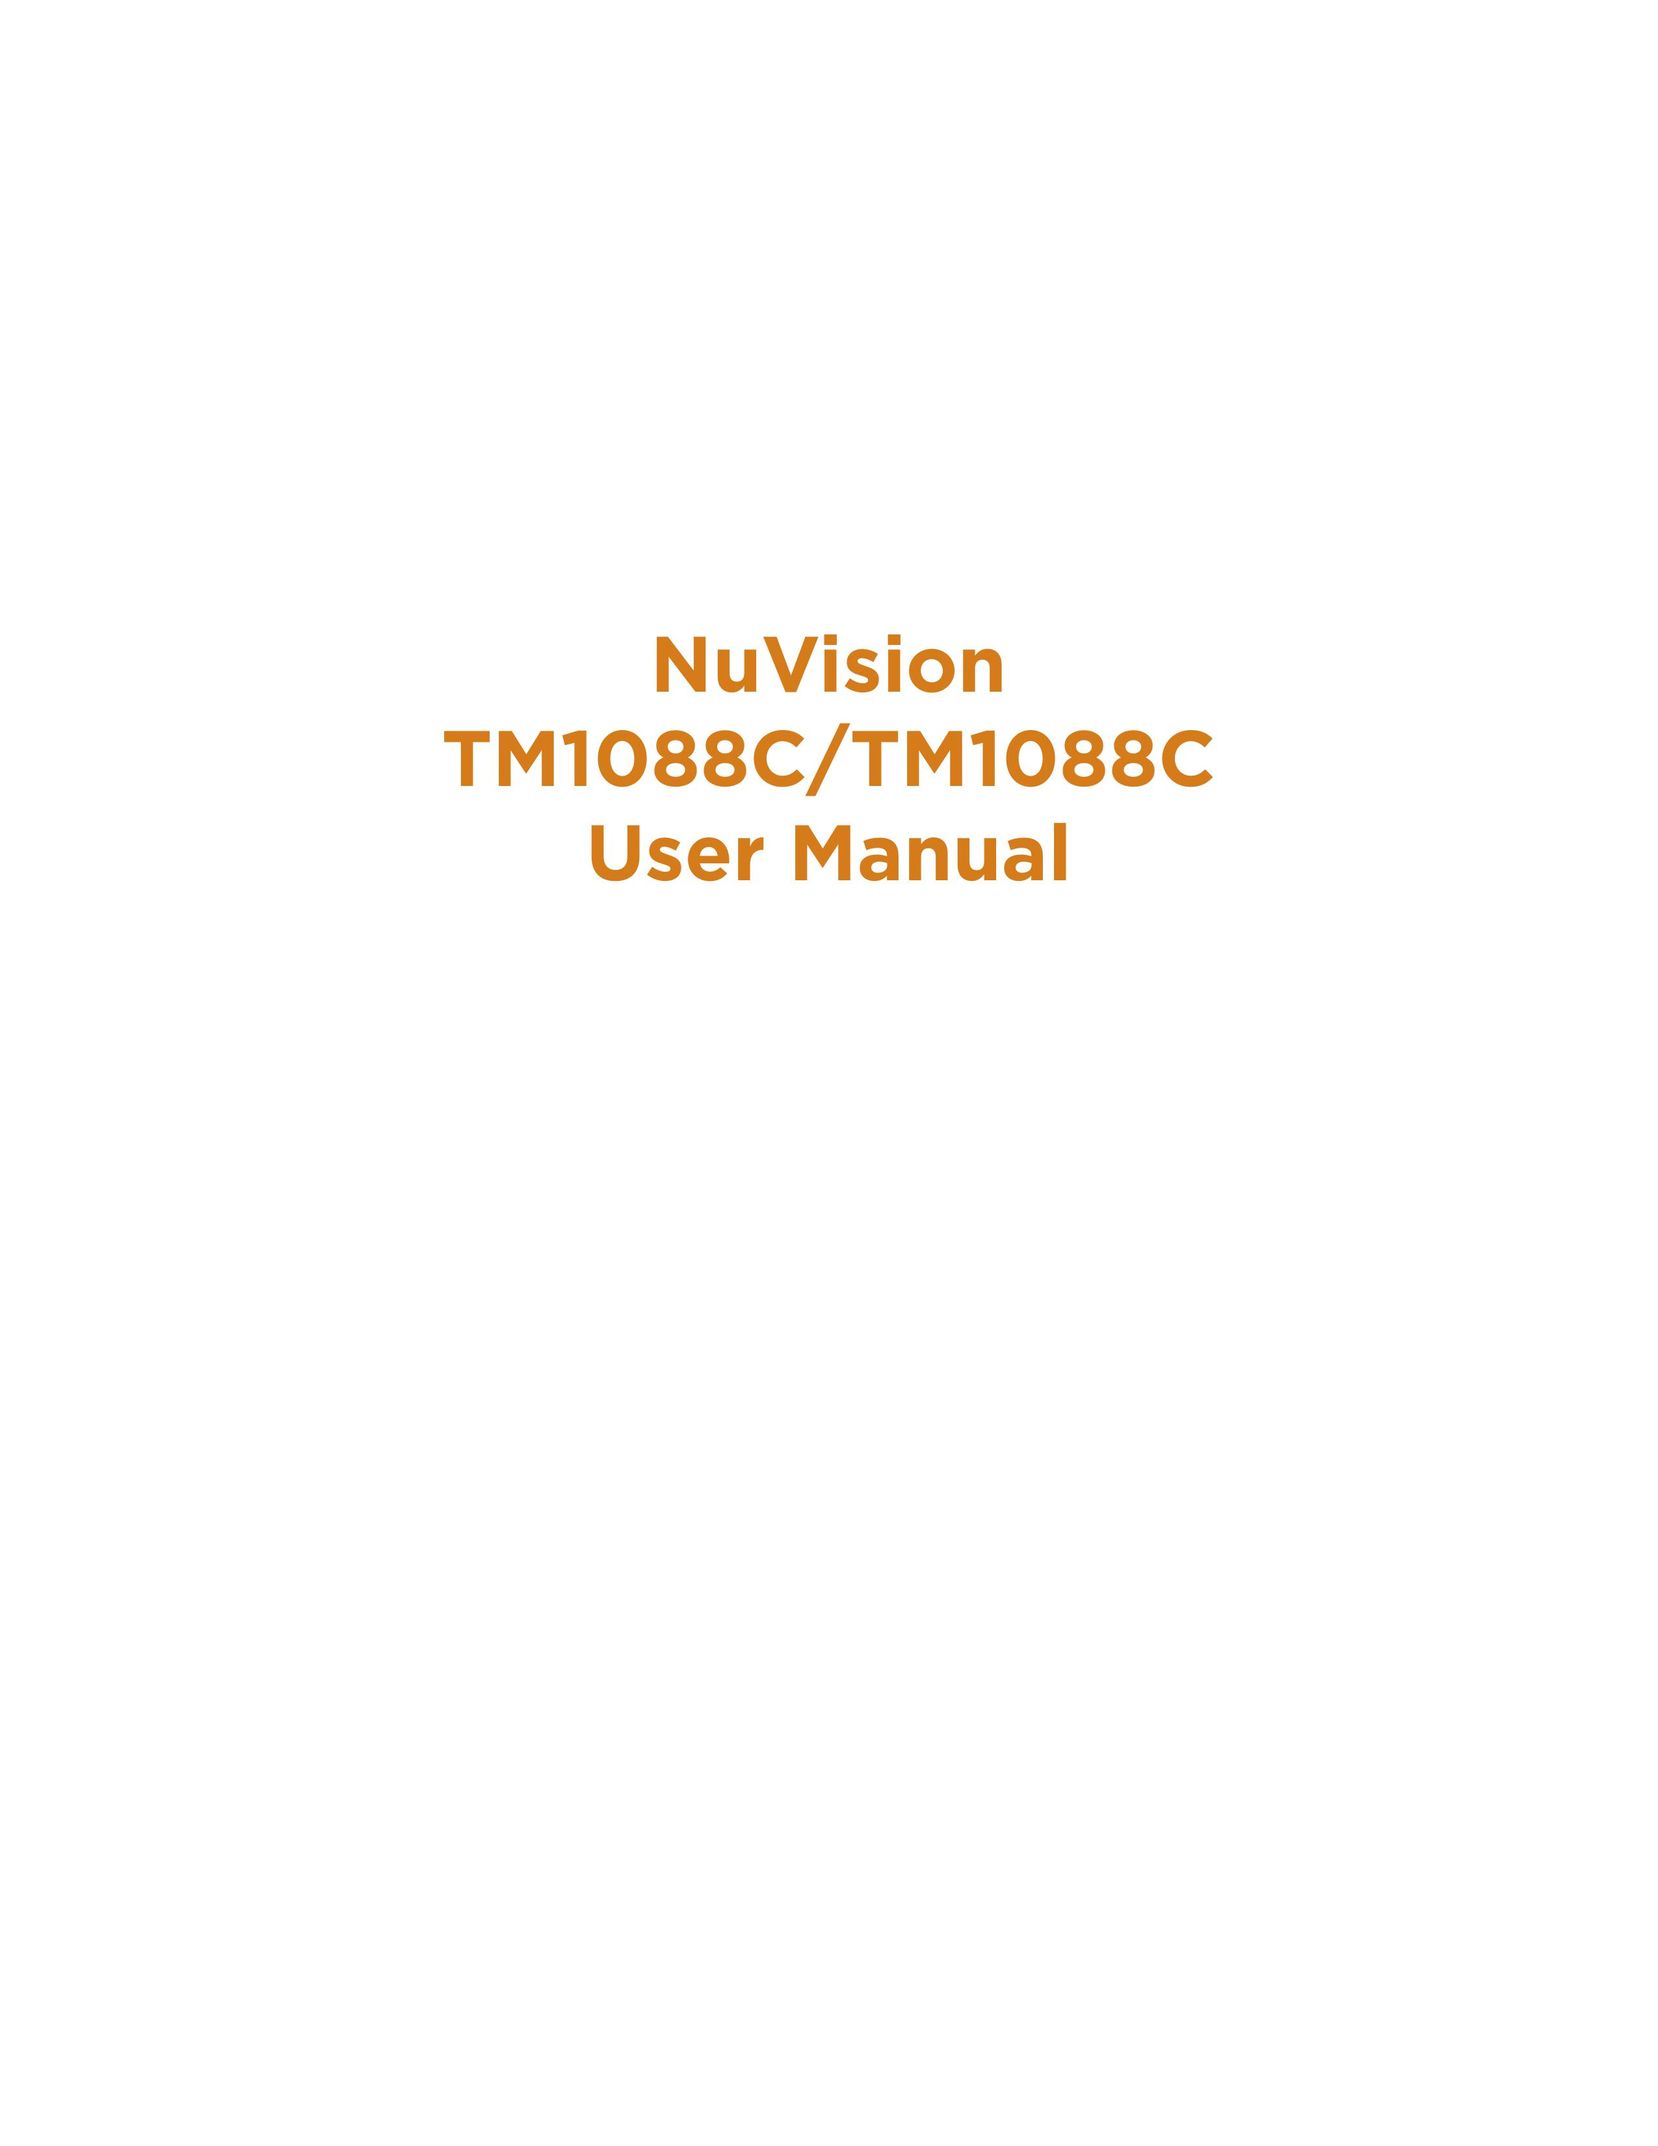 NuVision TM1088C Tablet User Manual